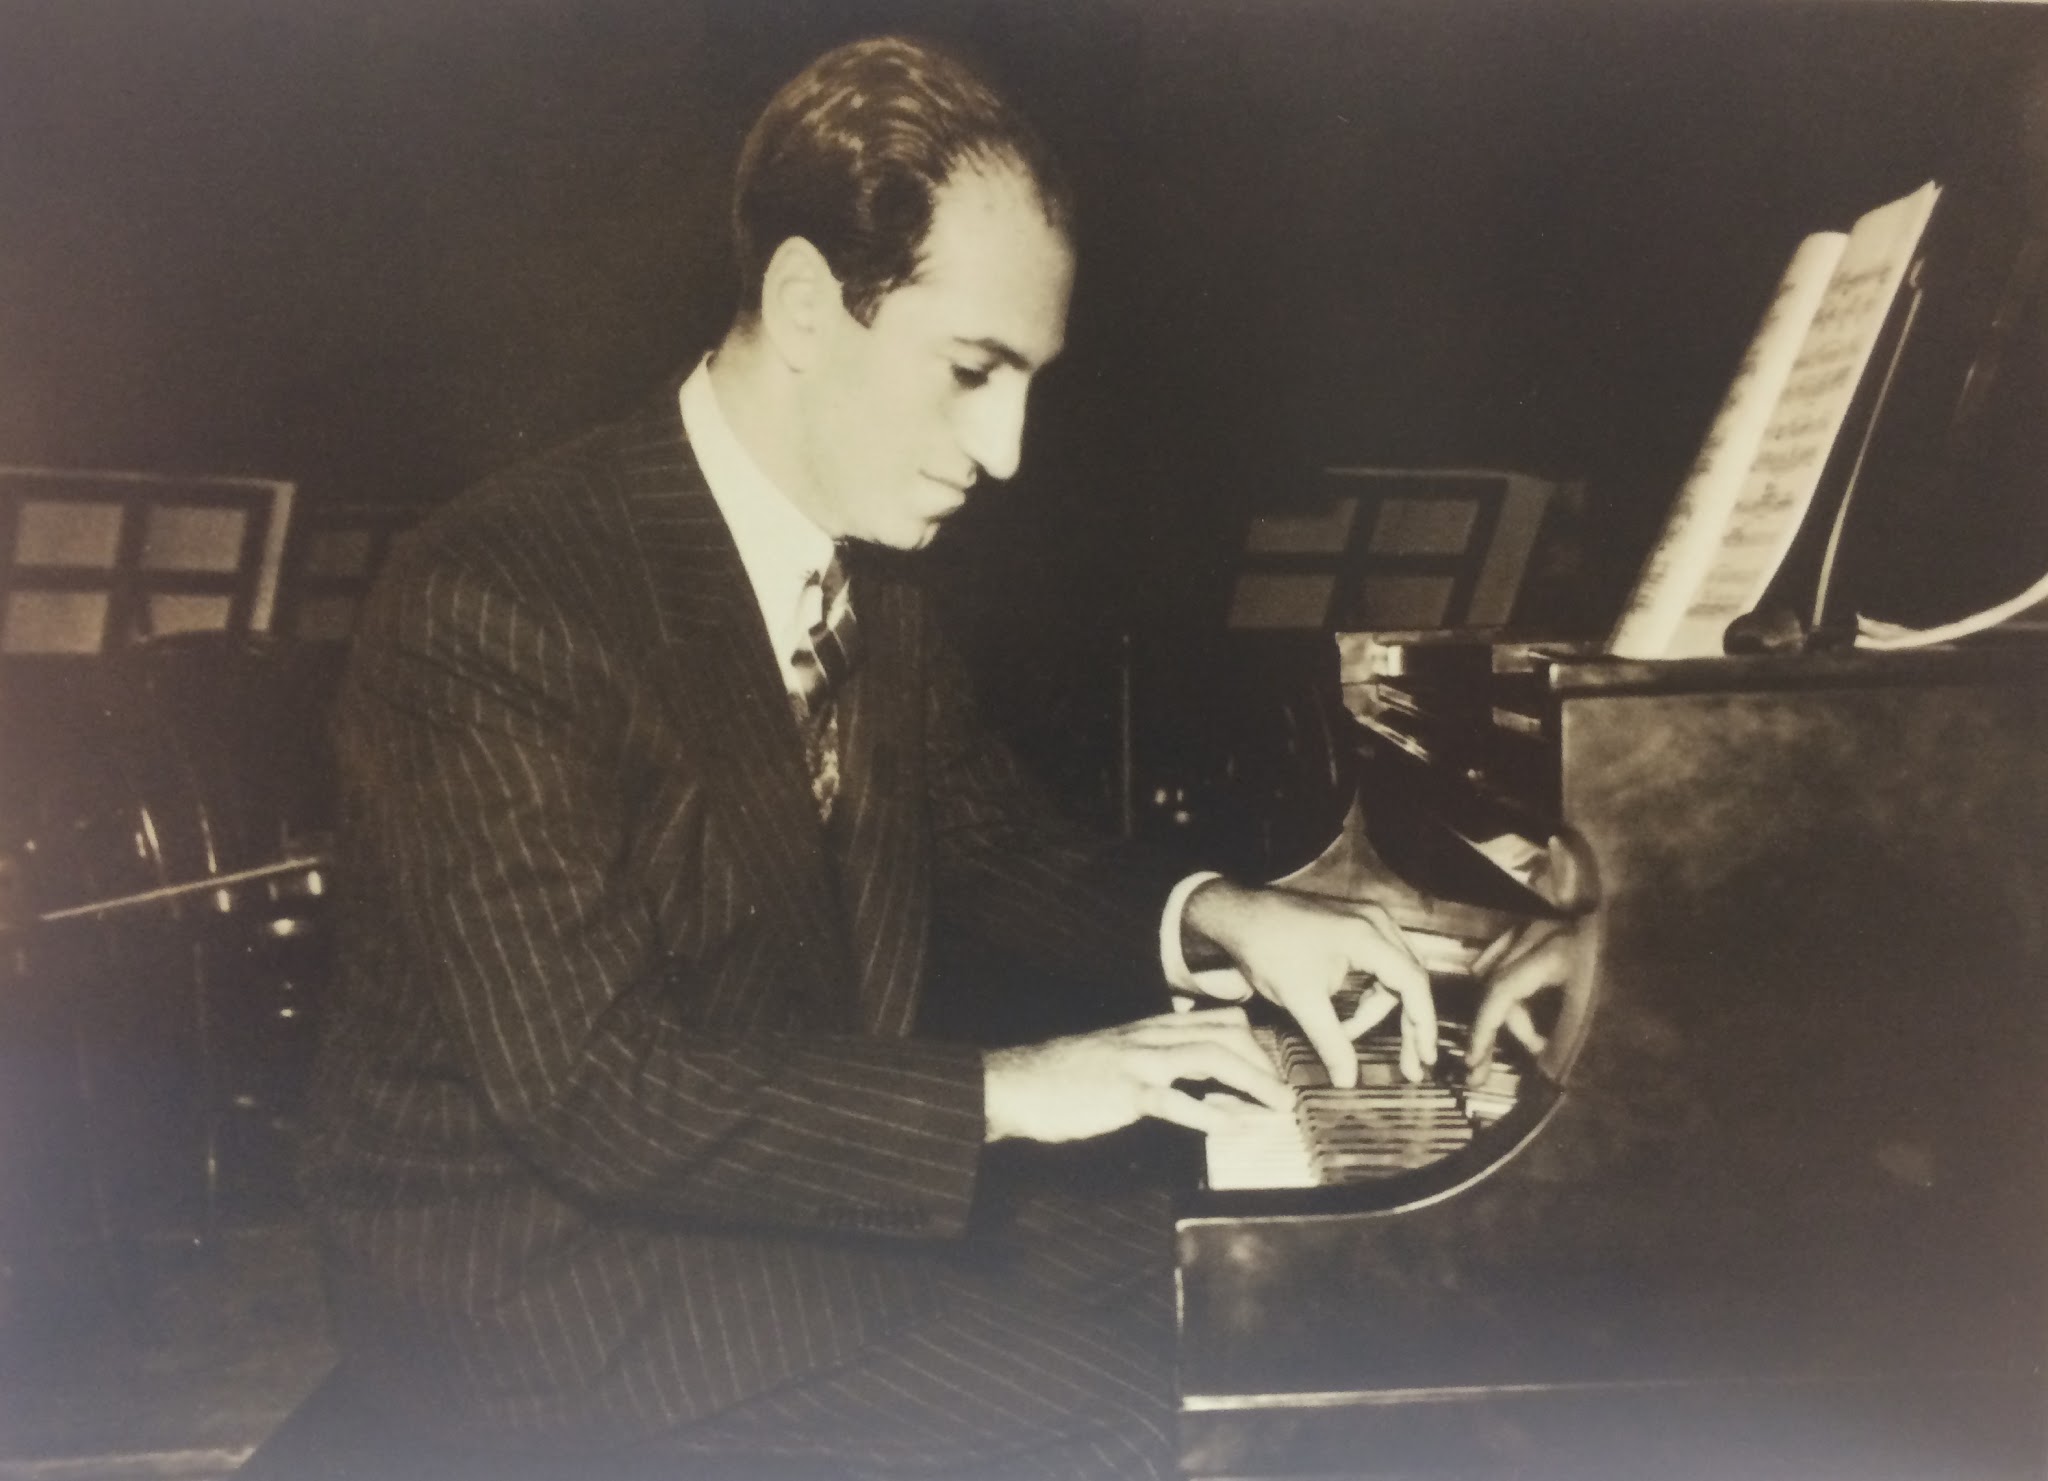 A publicity photo taken for Gershwin's 1934 radio program, Music by Gershwin. Used with permission of the Library of Congress and the Gershwin Family Estates